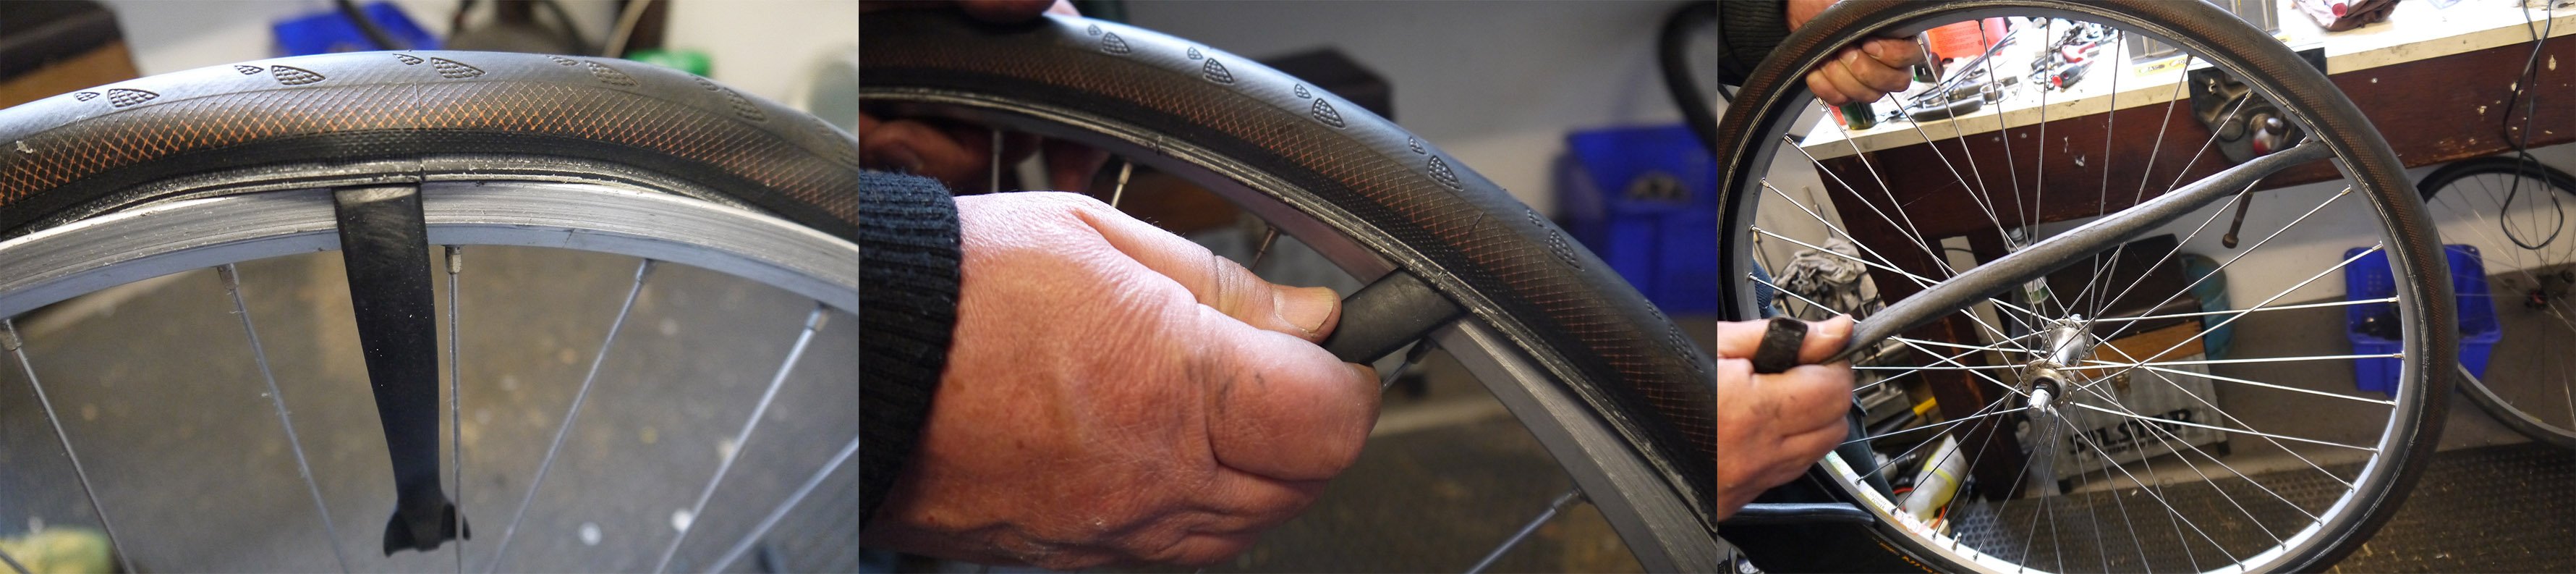 changing a bicycle inner tube